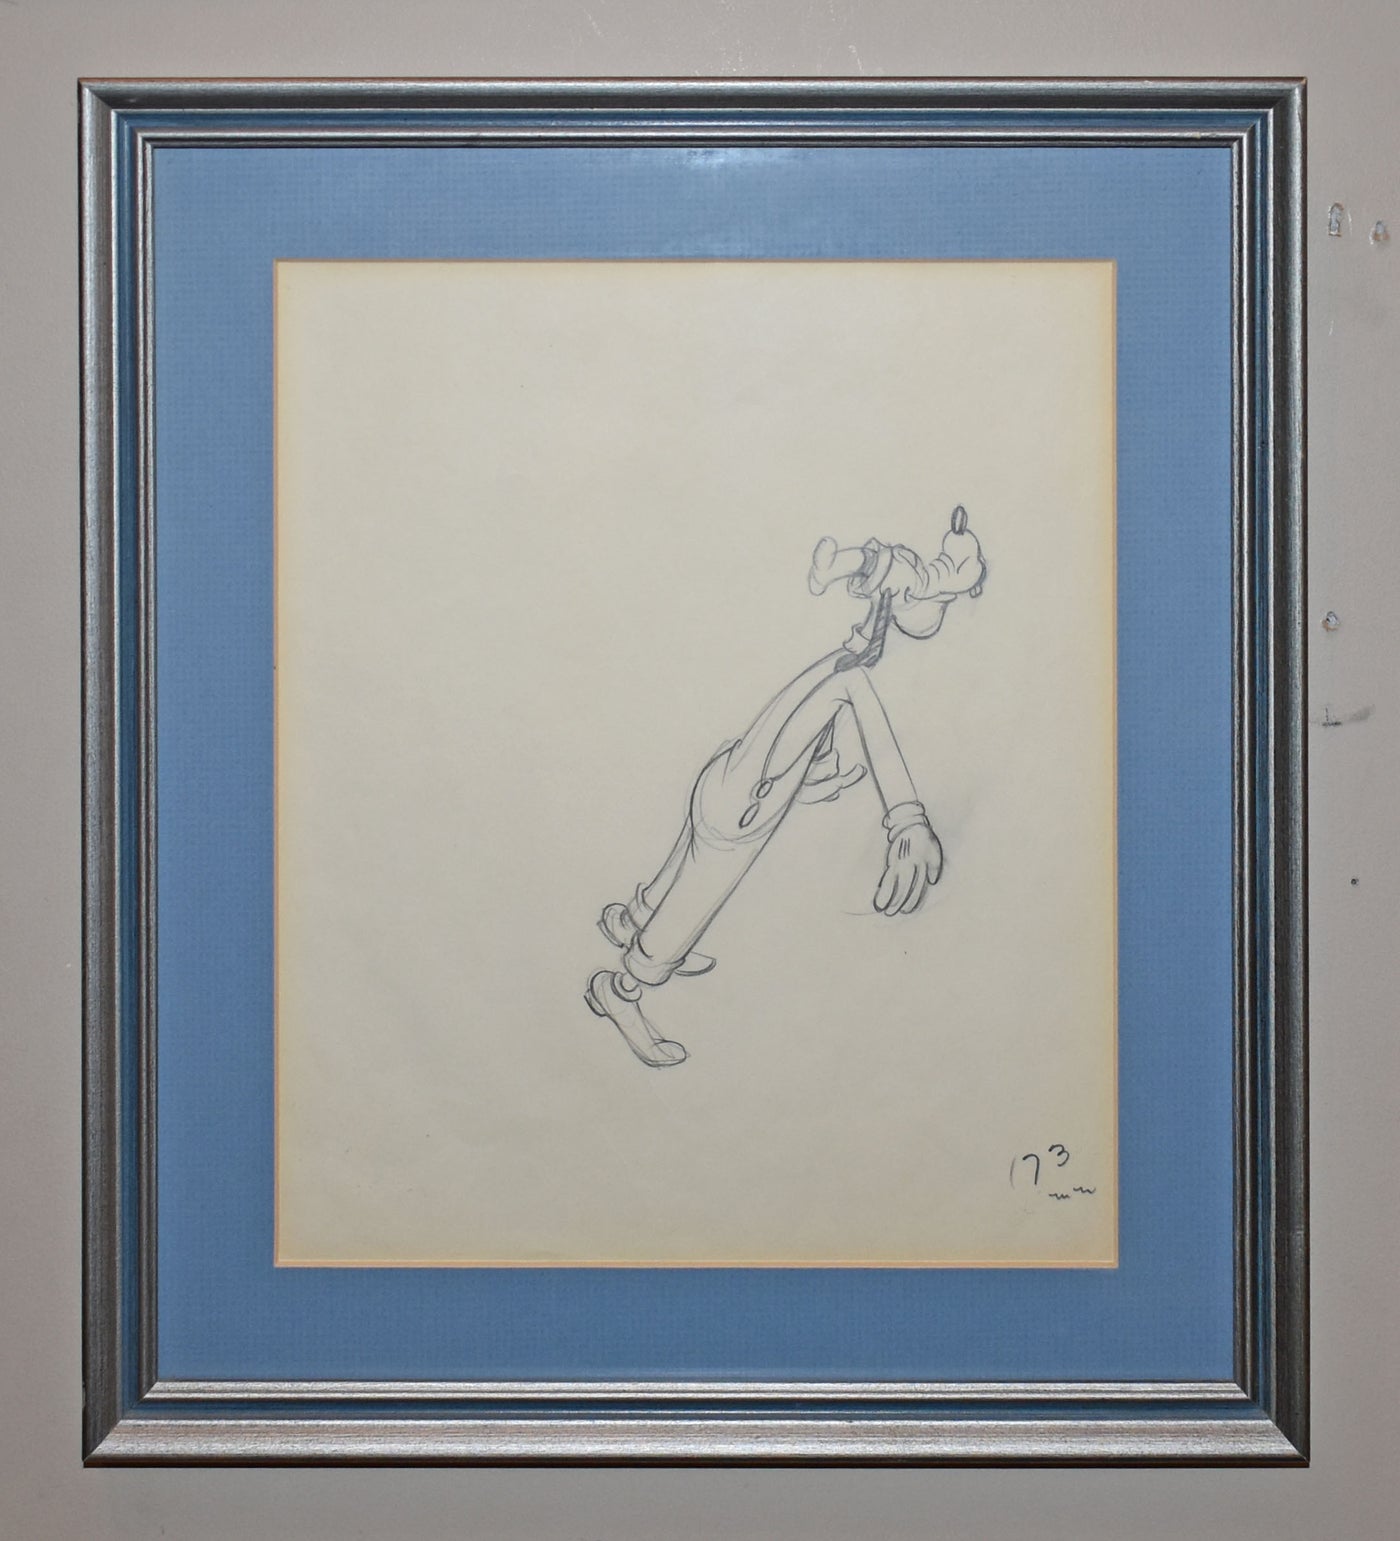 Original Walt Disney Production Drawing from Clock Cleaners (1937) featuring Goofy